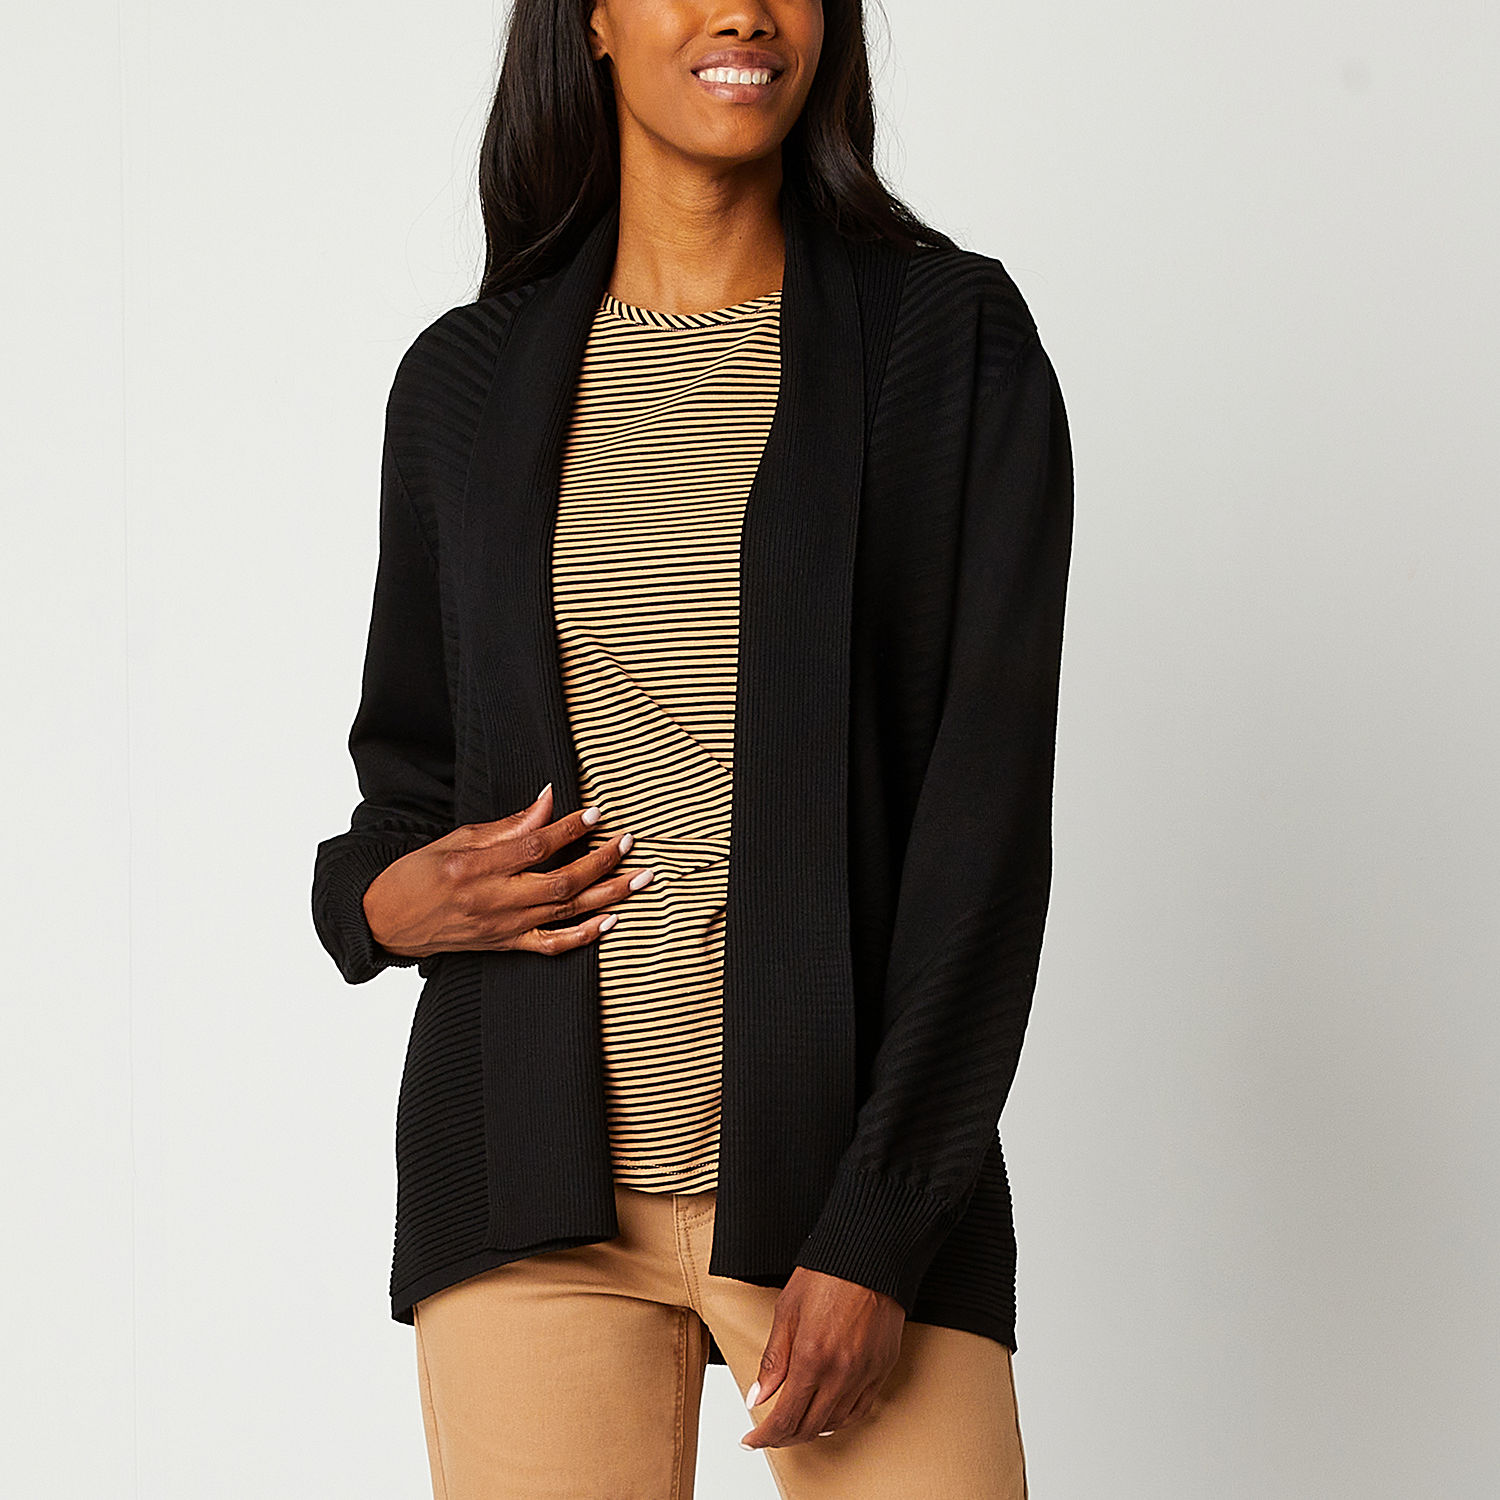 Liz Claiborne Womens Long Sleeve Open Front Cardigan - JCPenney